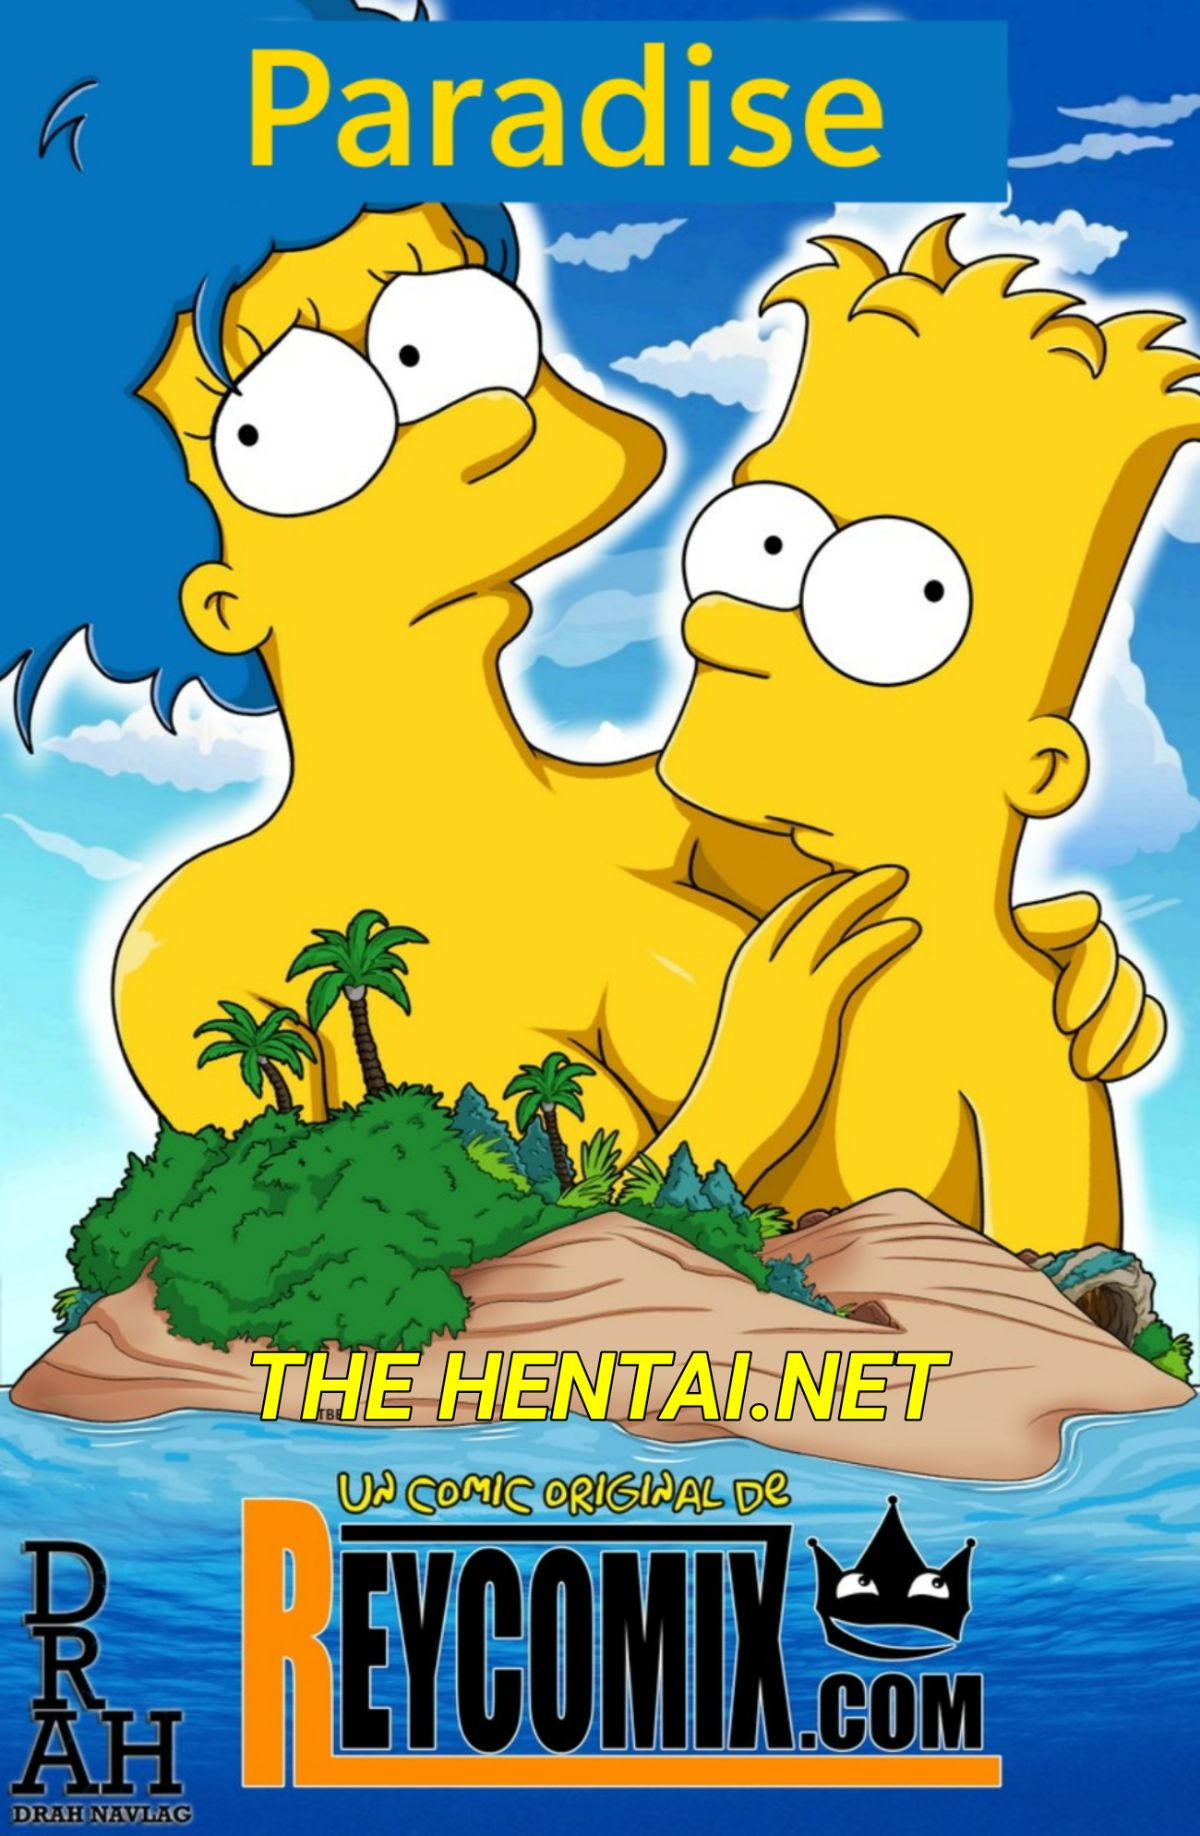 The Simpsons Paradise Hentai pt-br 01